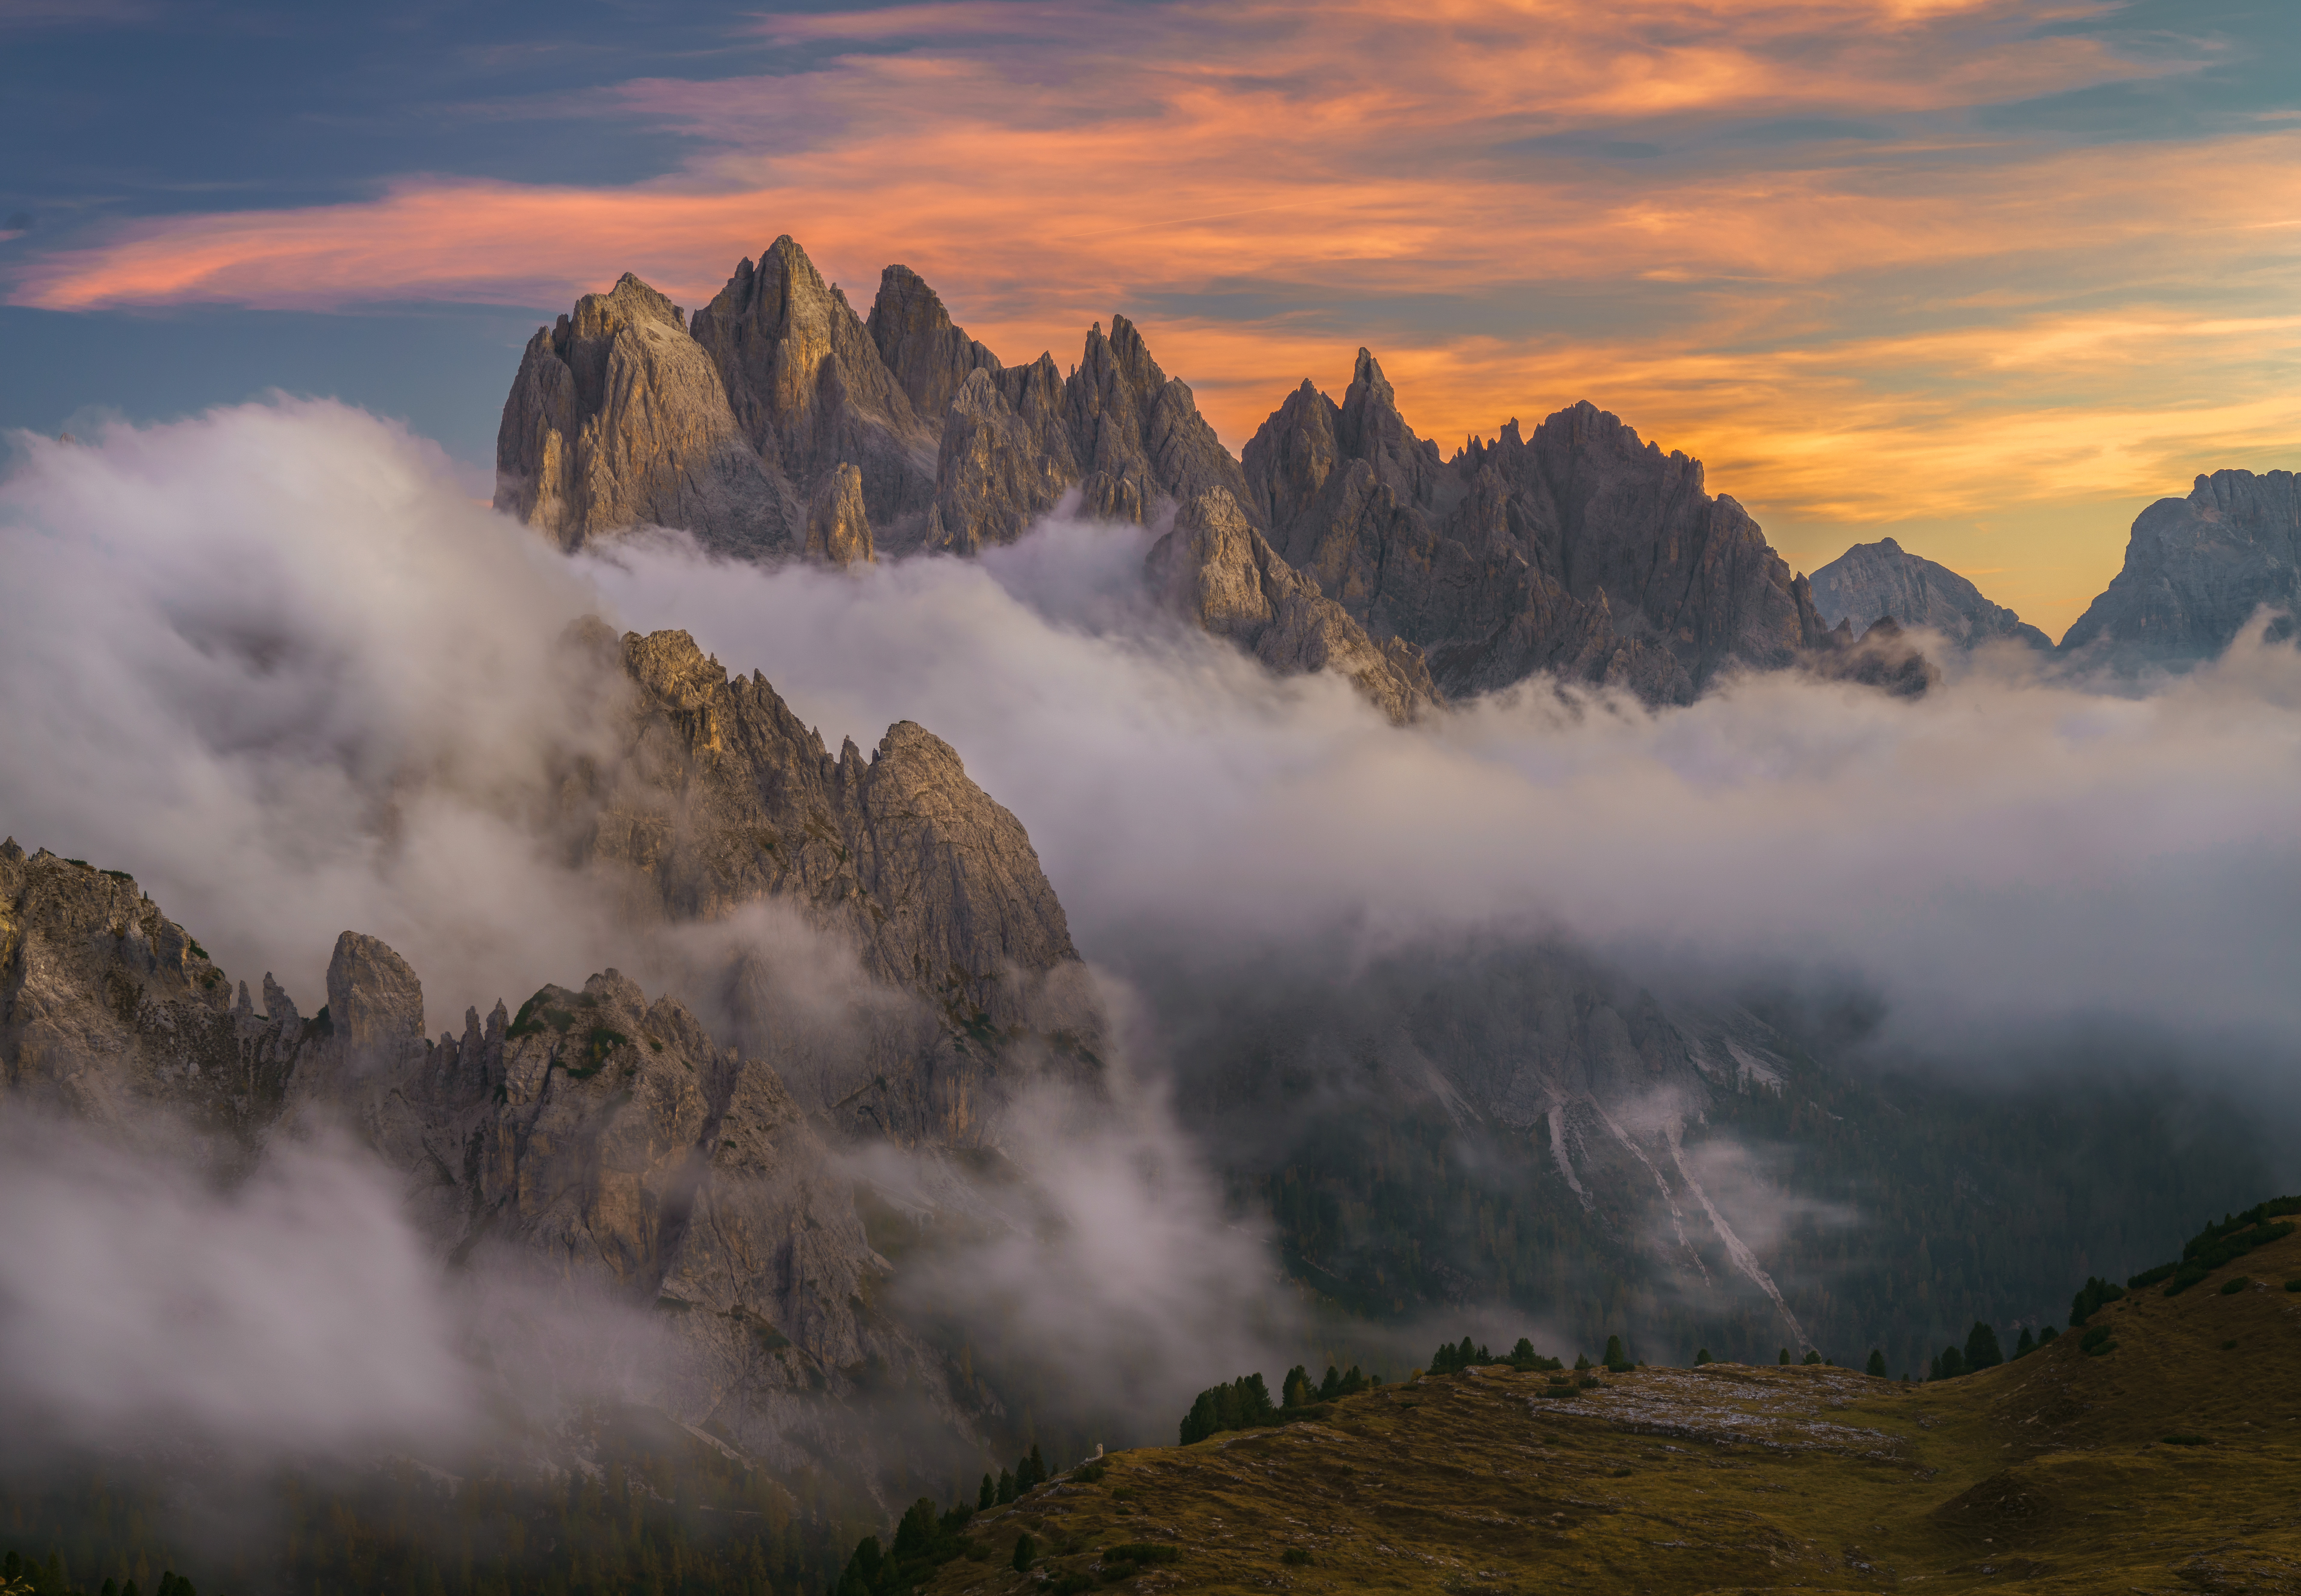 General 7647x5304 mountains clouds sunset mist nature Dolomites field cliff landscape sunset glow sky trees